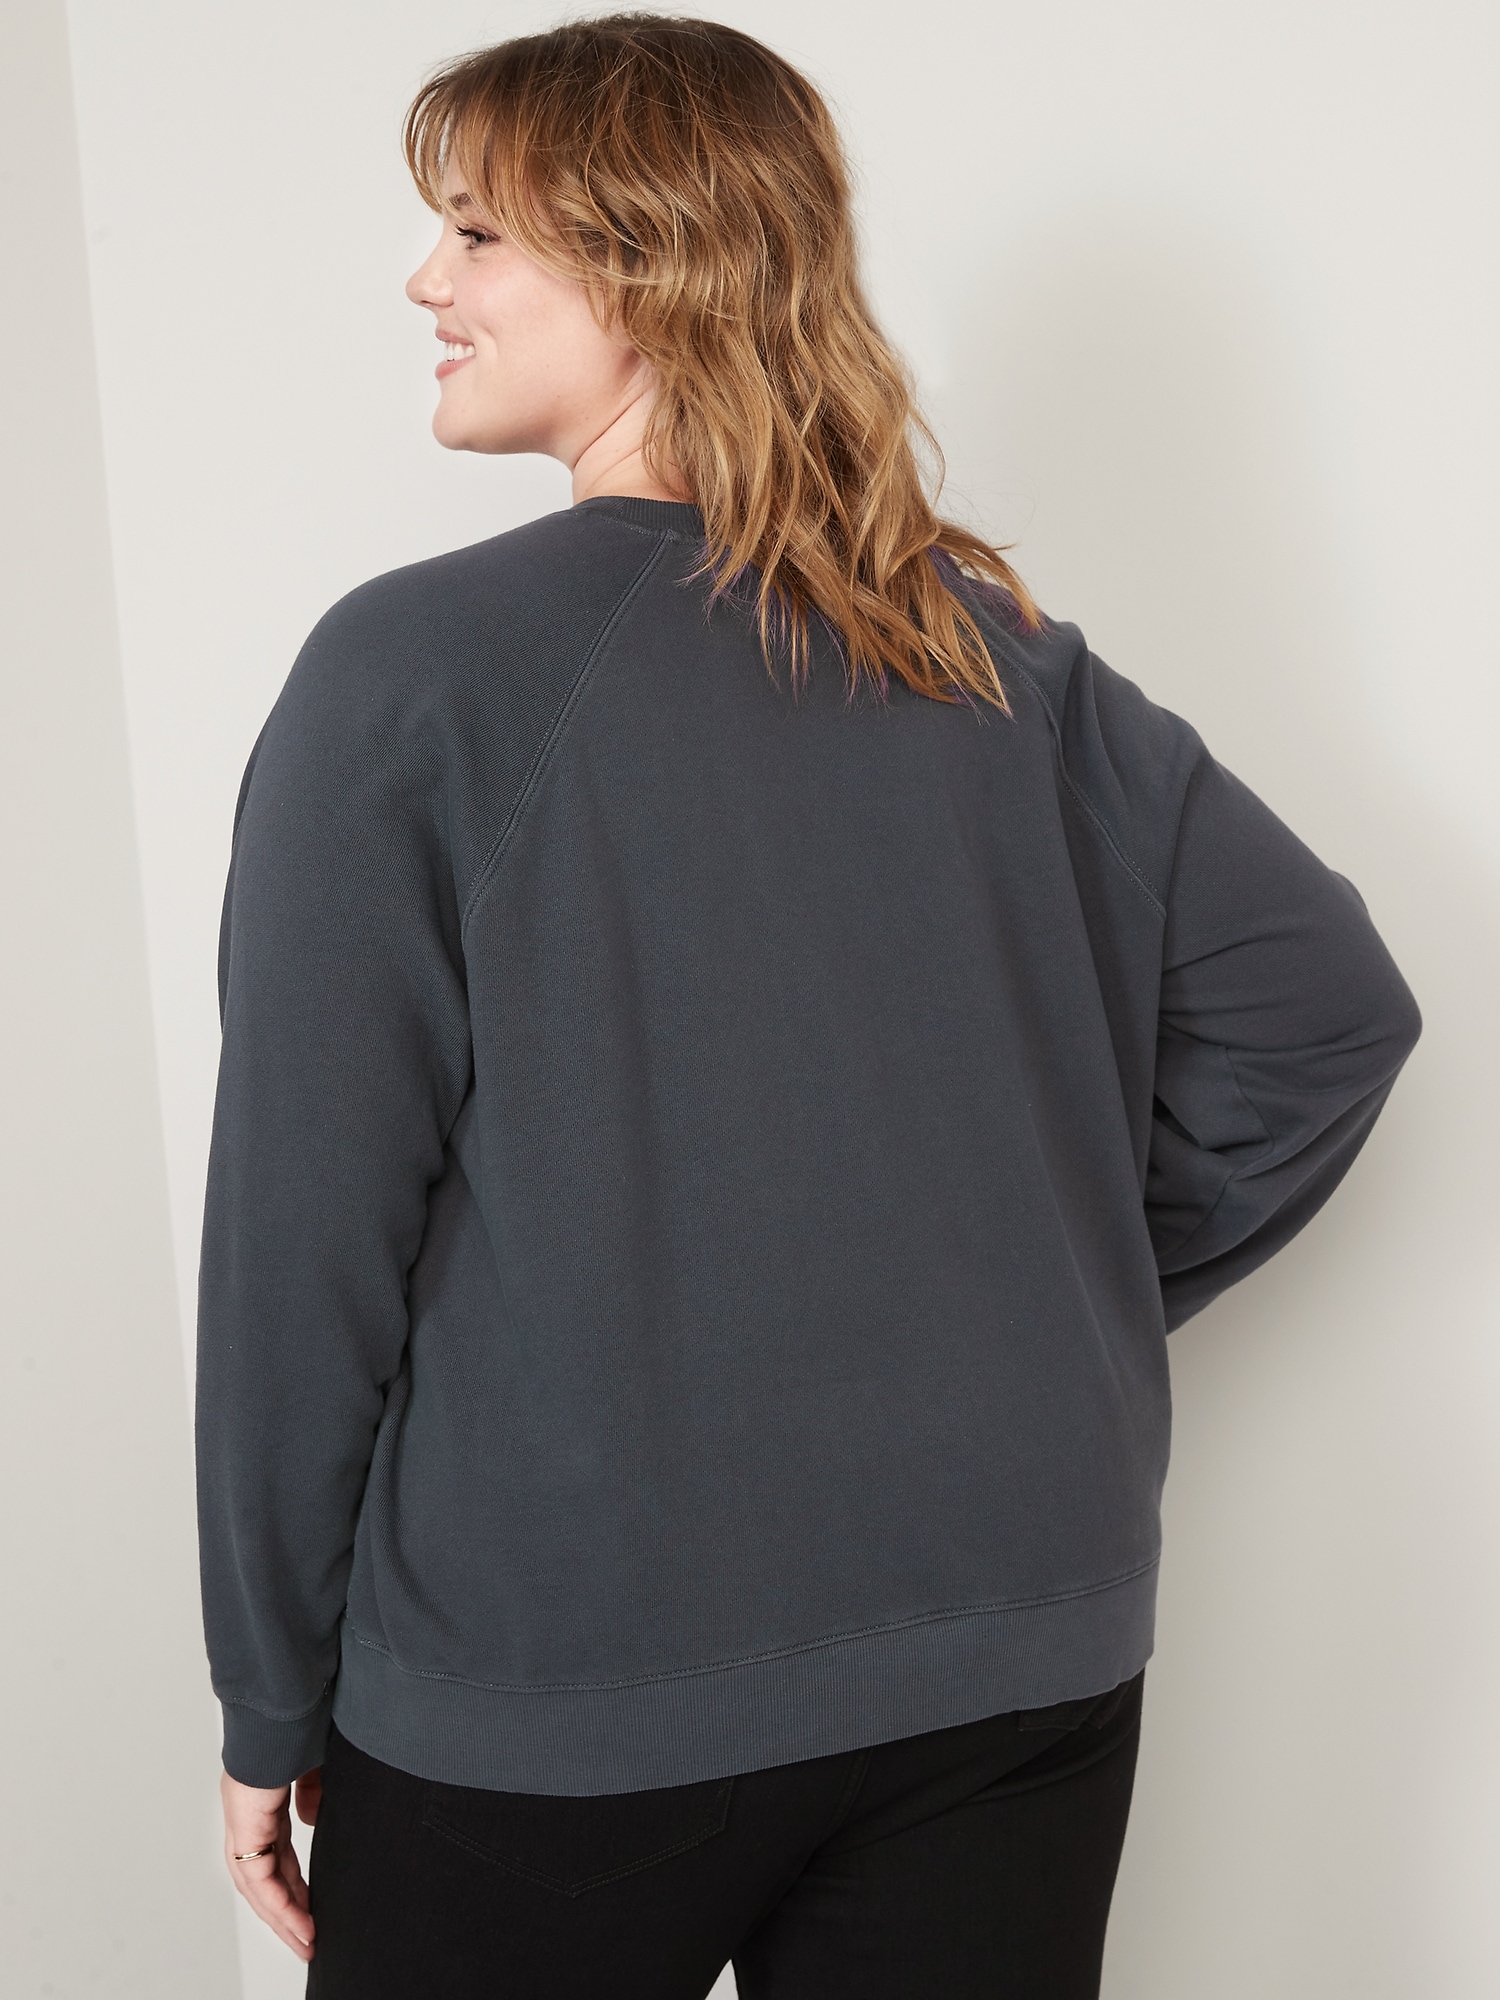 Long-Sleeve Logo Graphic French-Terry Sweatshirt for Women | Old Navy